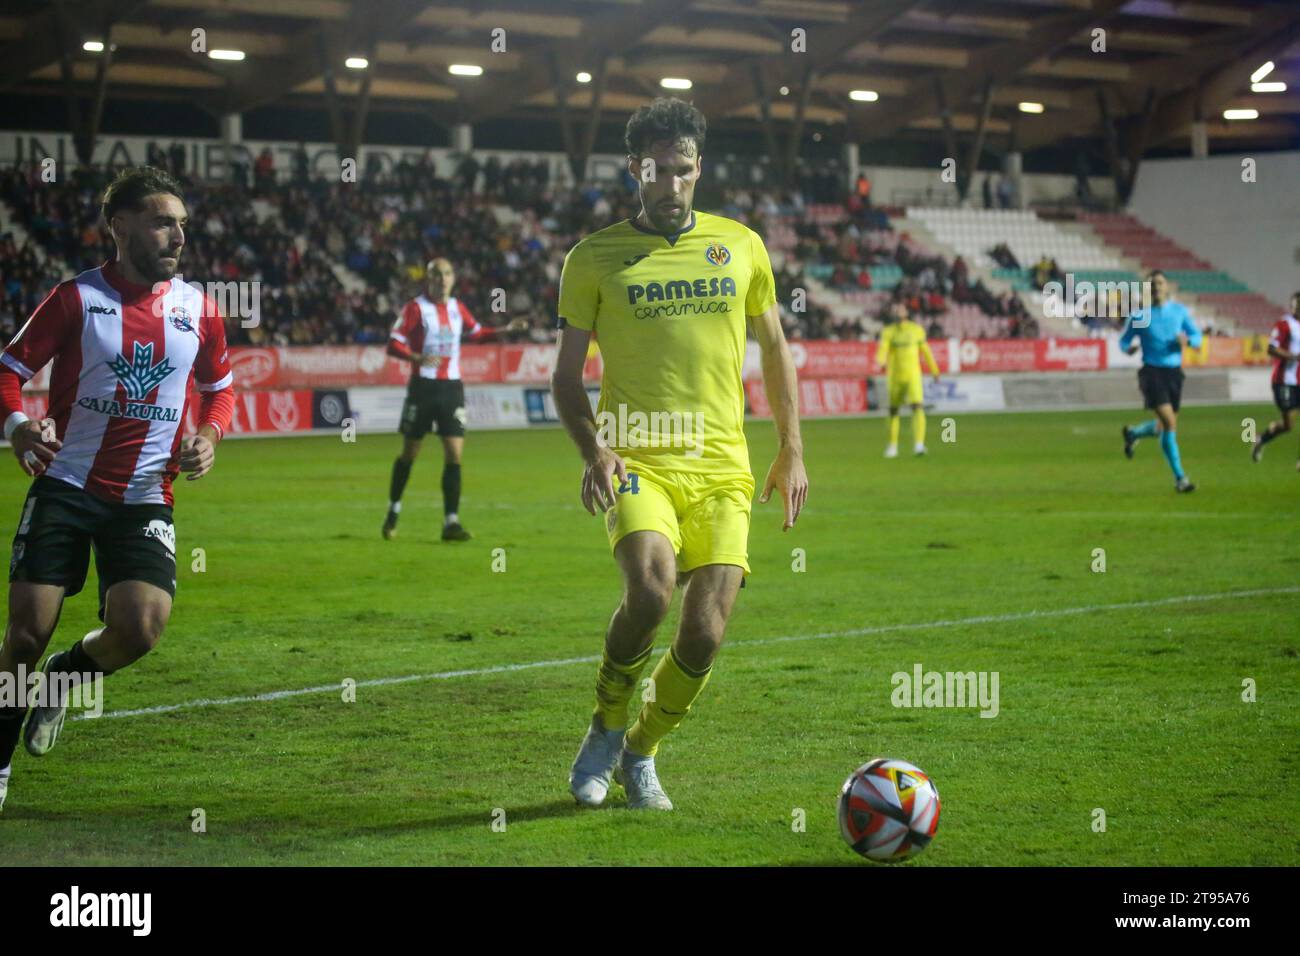 Zamora, Spain, 22th November, 2023: Villarreal CF's player, Alfredo Pedraza (24) protects the ball during the Second round of the SM El Rey Cup 2023-24 between Zamora CF and Villarreal CF, on November 22 of 2023, at the Ruta de la Plata Stadium, in Zamora, Spain. Credit: Alberto Brevers / Alamy Live News Stock Photo